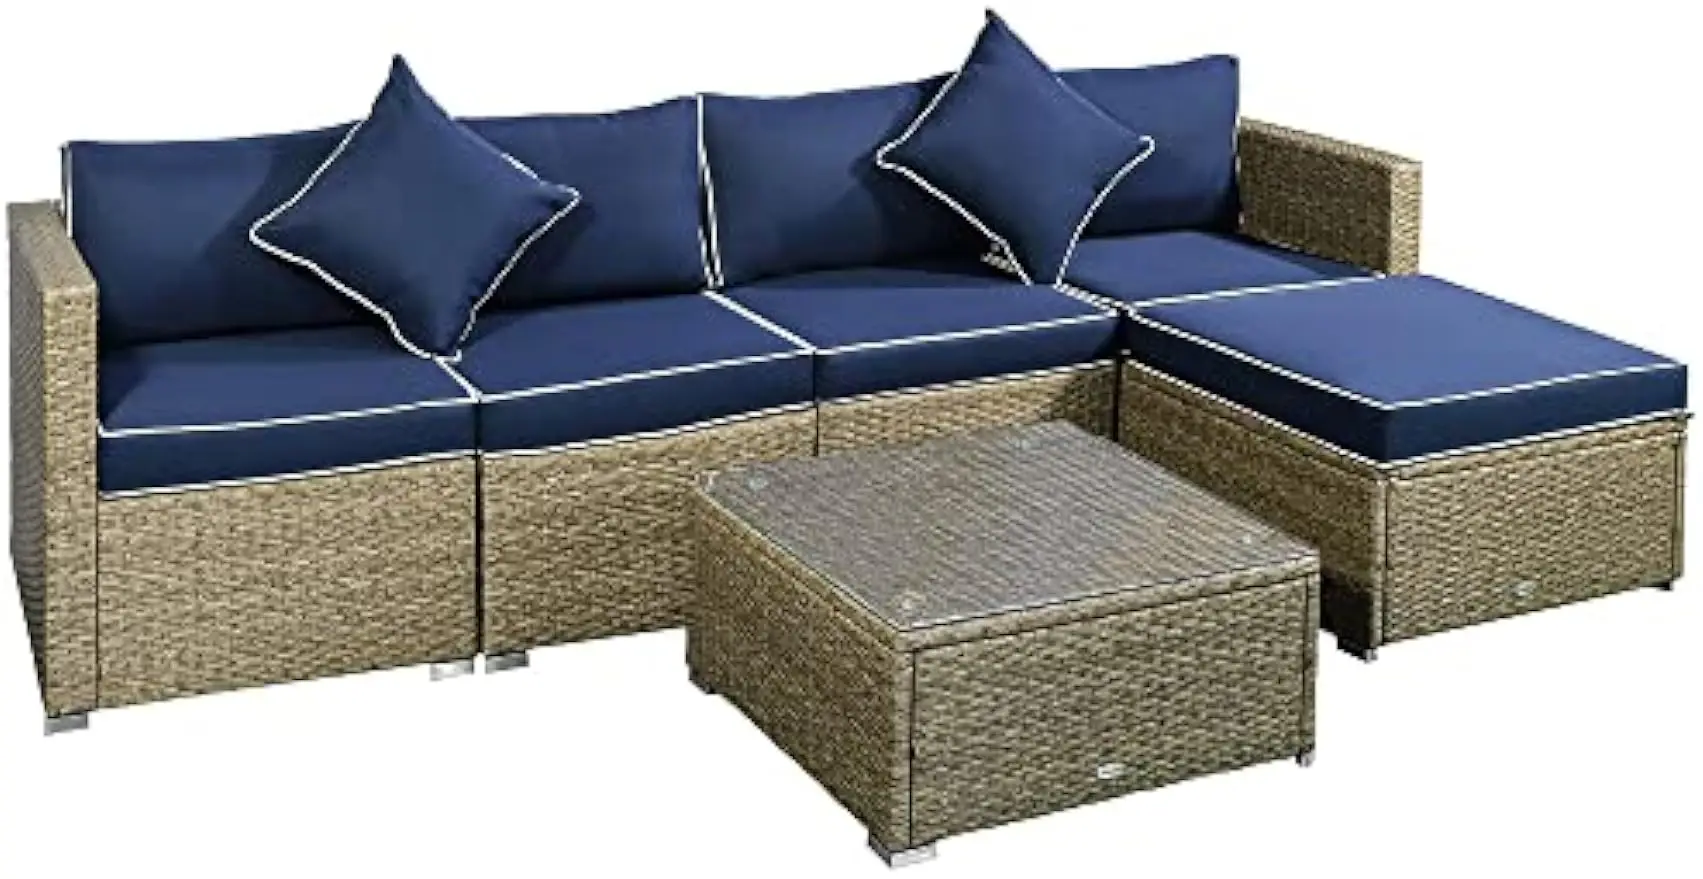 

6 Piece Patio Furniture Set Outdoor Wicker Conversation Set All Weather PE Rattan Sectional Sofa Set with Ottoman